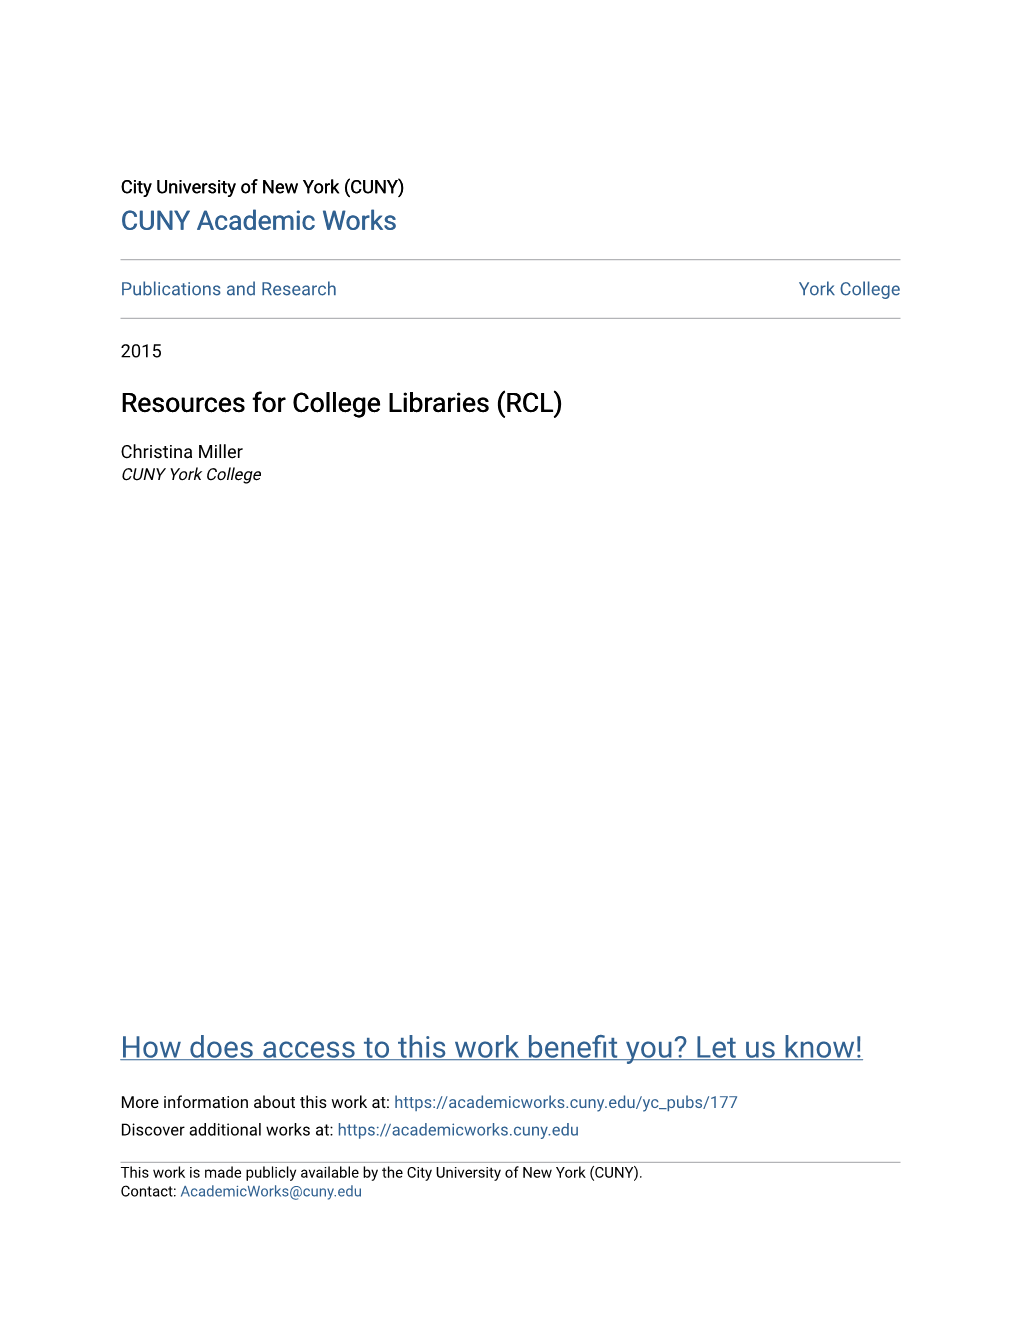 Resources for College Libraries (RCL)